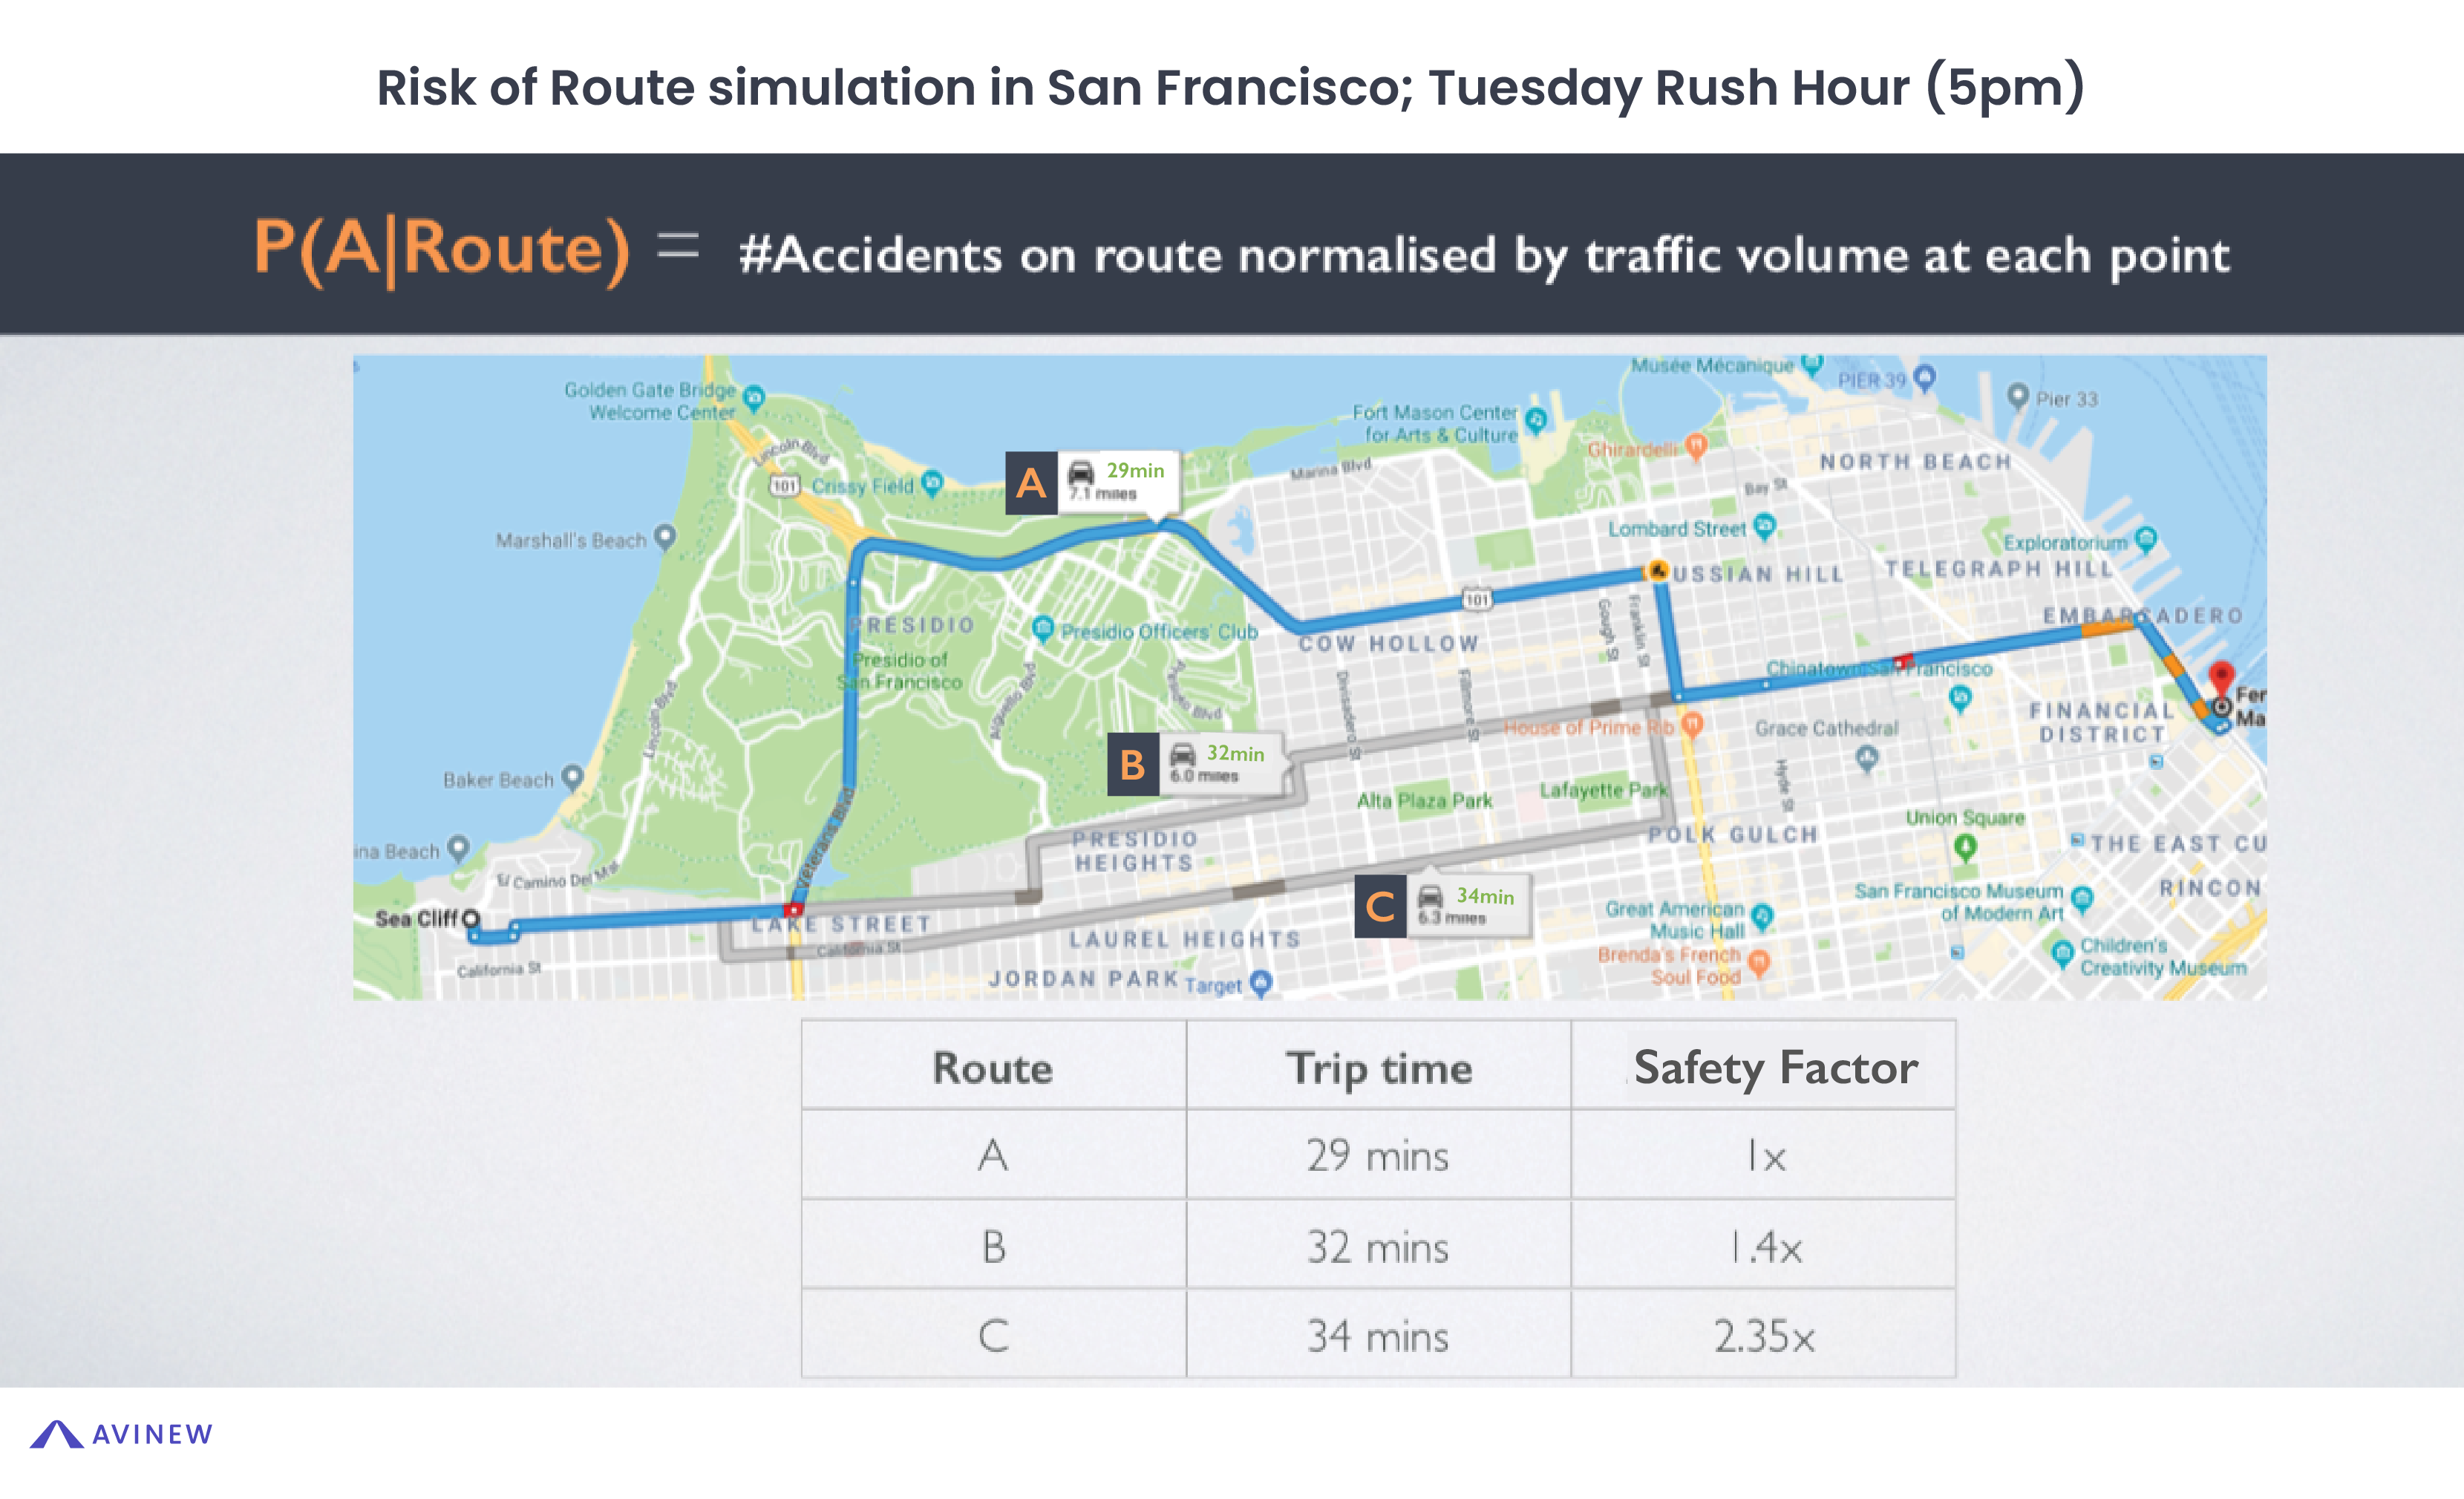 Risk of Route simulation in San Francisco, on a Tuesday at 5 pm during rush hour traffic. The safety factor indicates how many times safer a route is.